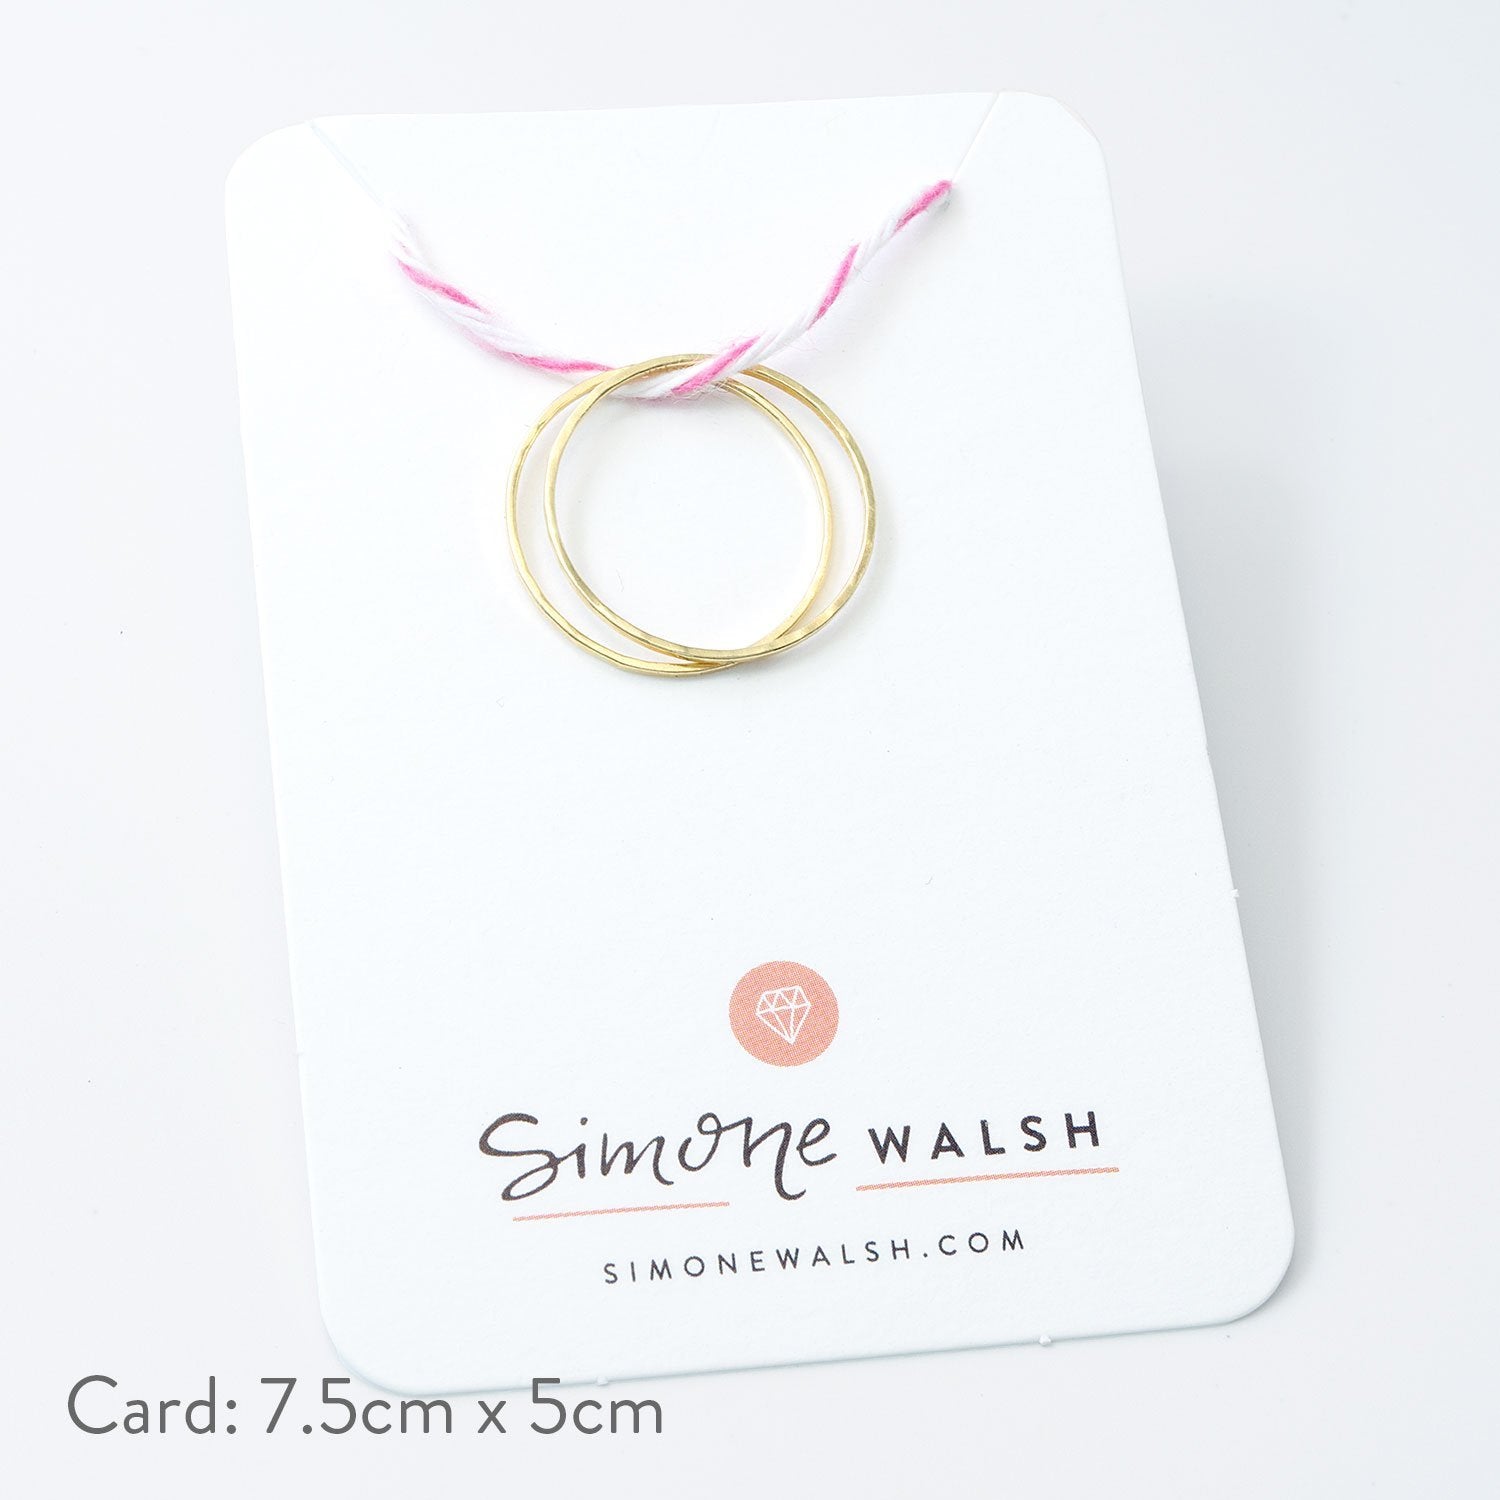 Solid gold stacking rings set - Simone Walsh Jewellery Australia